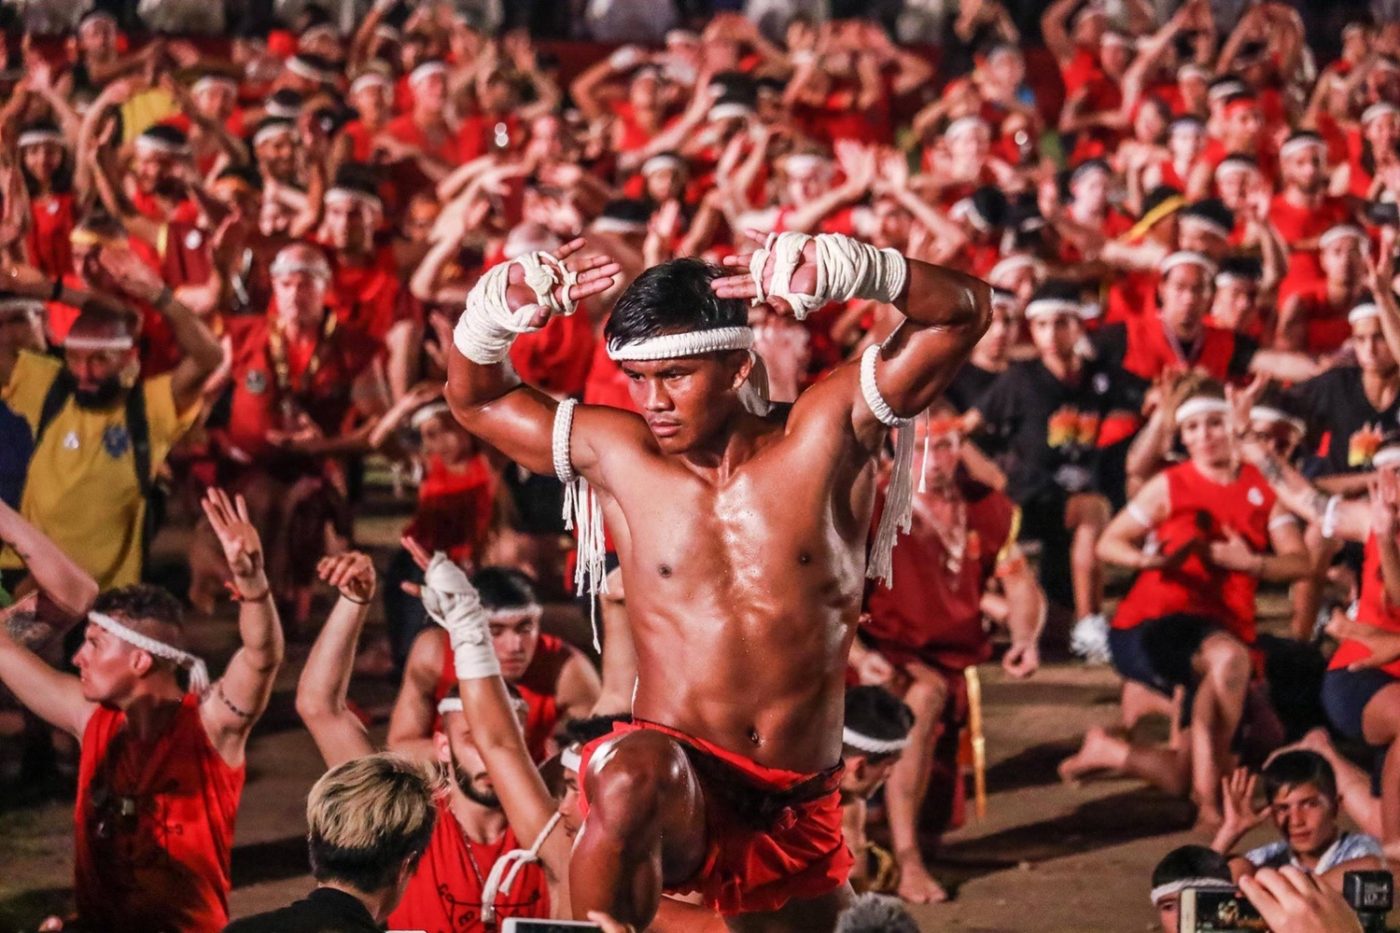 Love Muay Thai? This Will Make You Want to Visit the Wai Kru Festival!